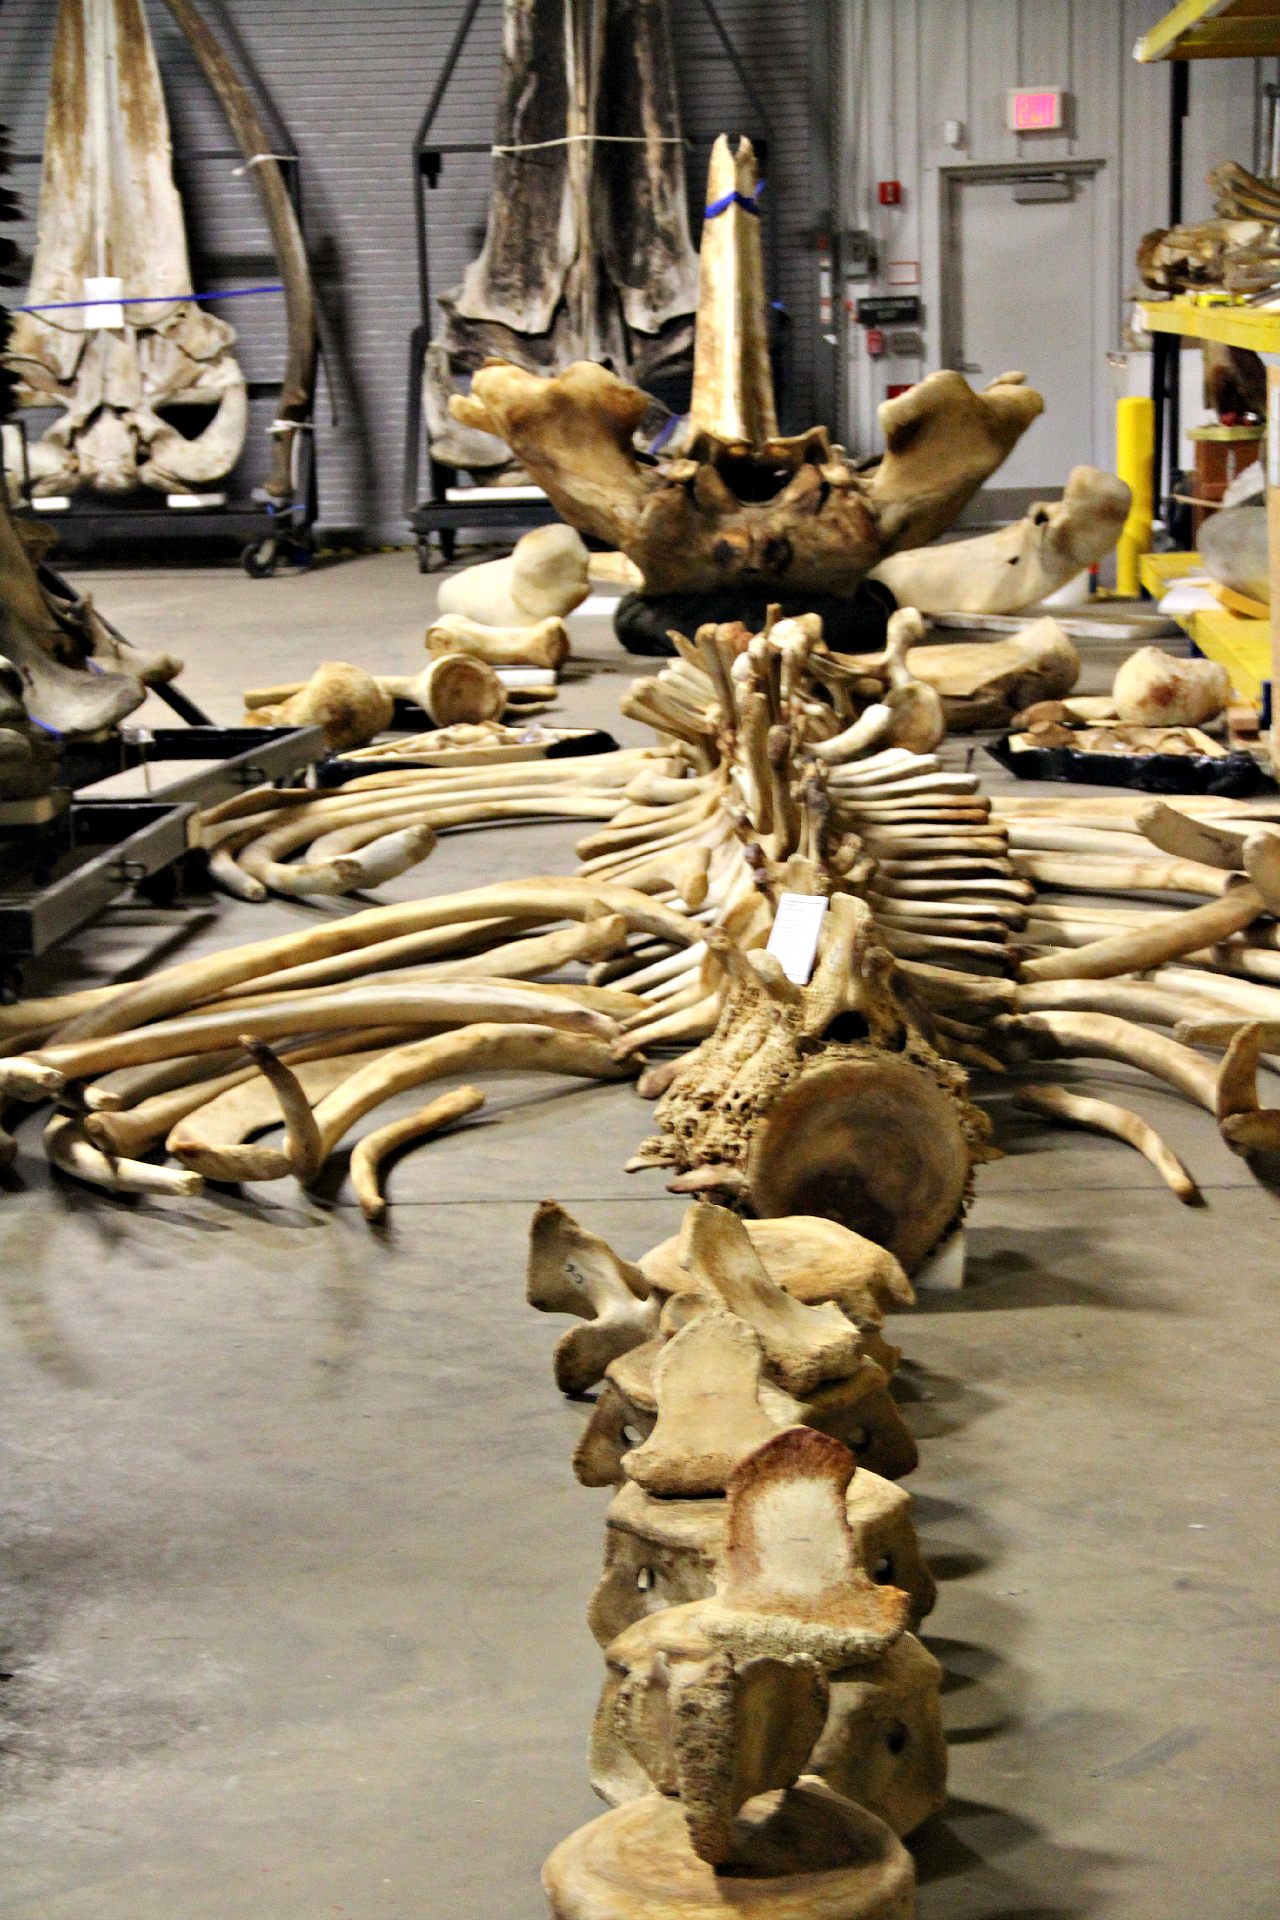 Whale bone collector uncovering secrets of world's largest marine mammals -  ABC News